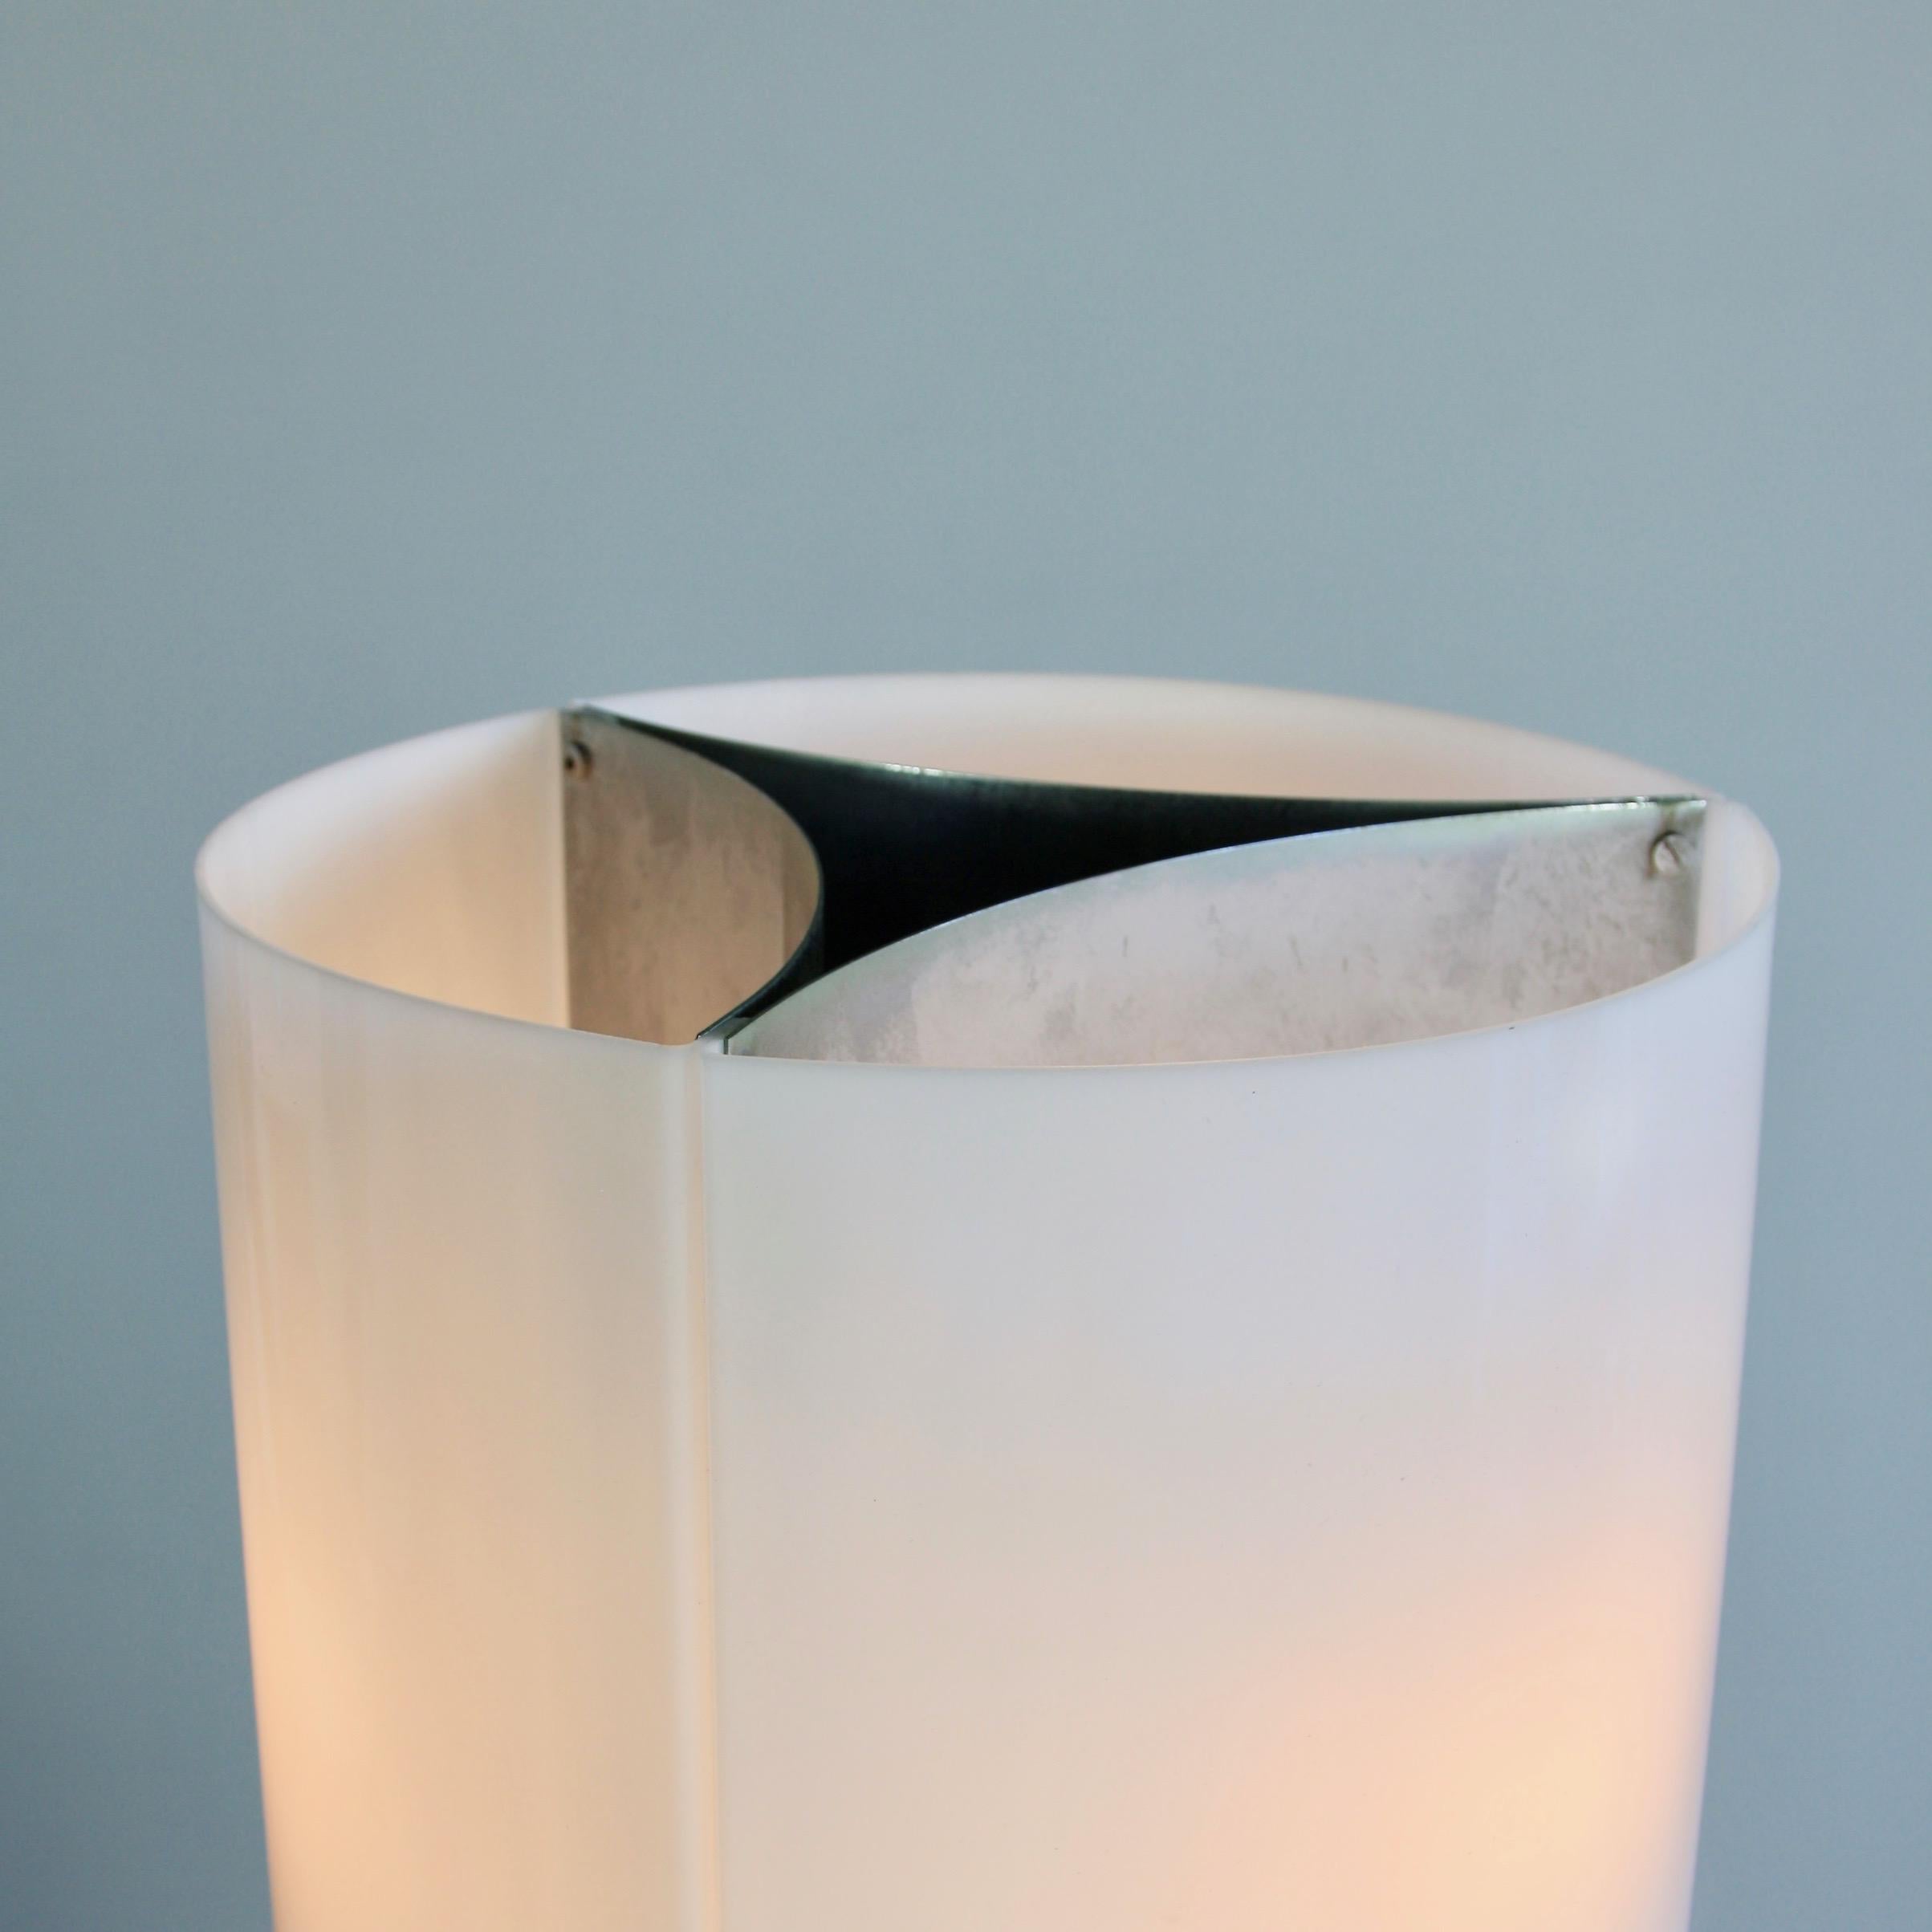 An early model of the table lamp 526 designed by Massimo Vignelli. Italy, Arteluce, 1965.

Chromed metal base with opaque perspex lampshade, divided into three sections. 3 light sockets.

Reference:

*Repertorio del Design Italiano, 2 vols. p